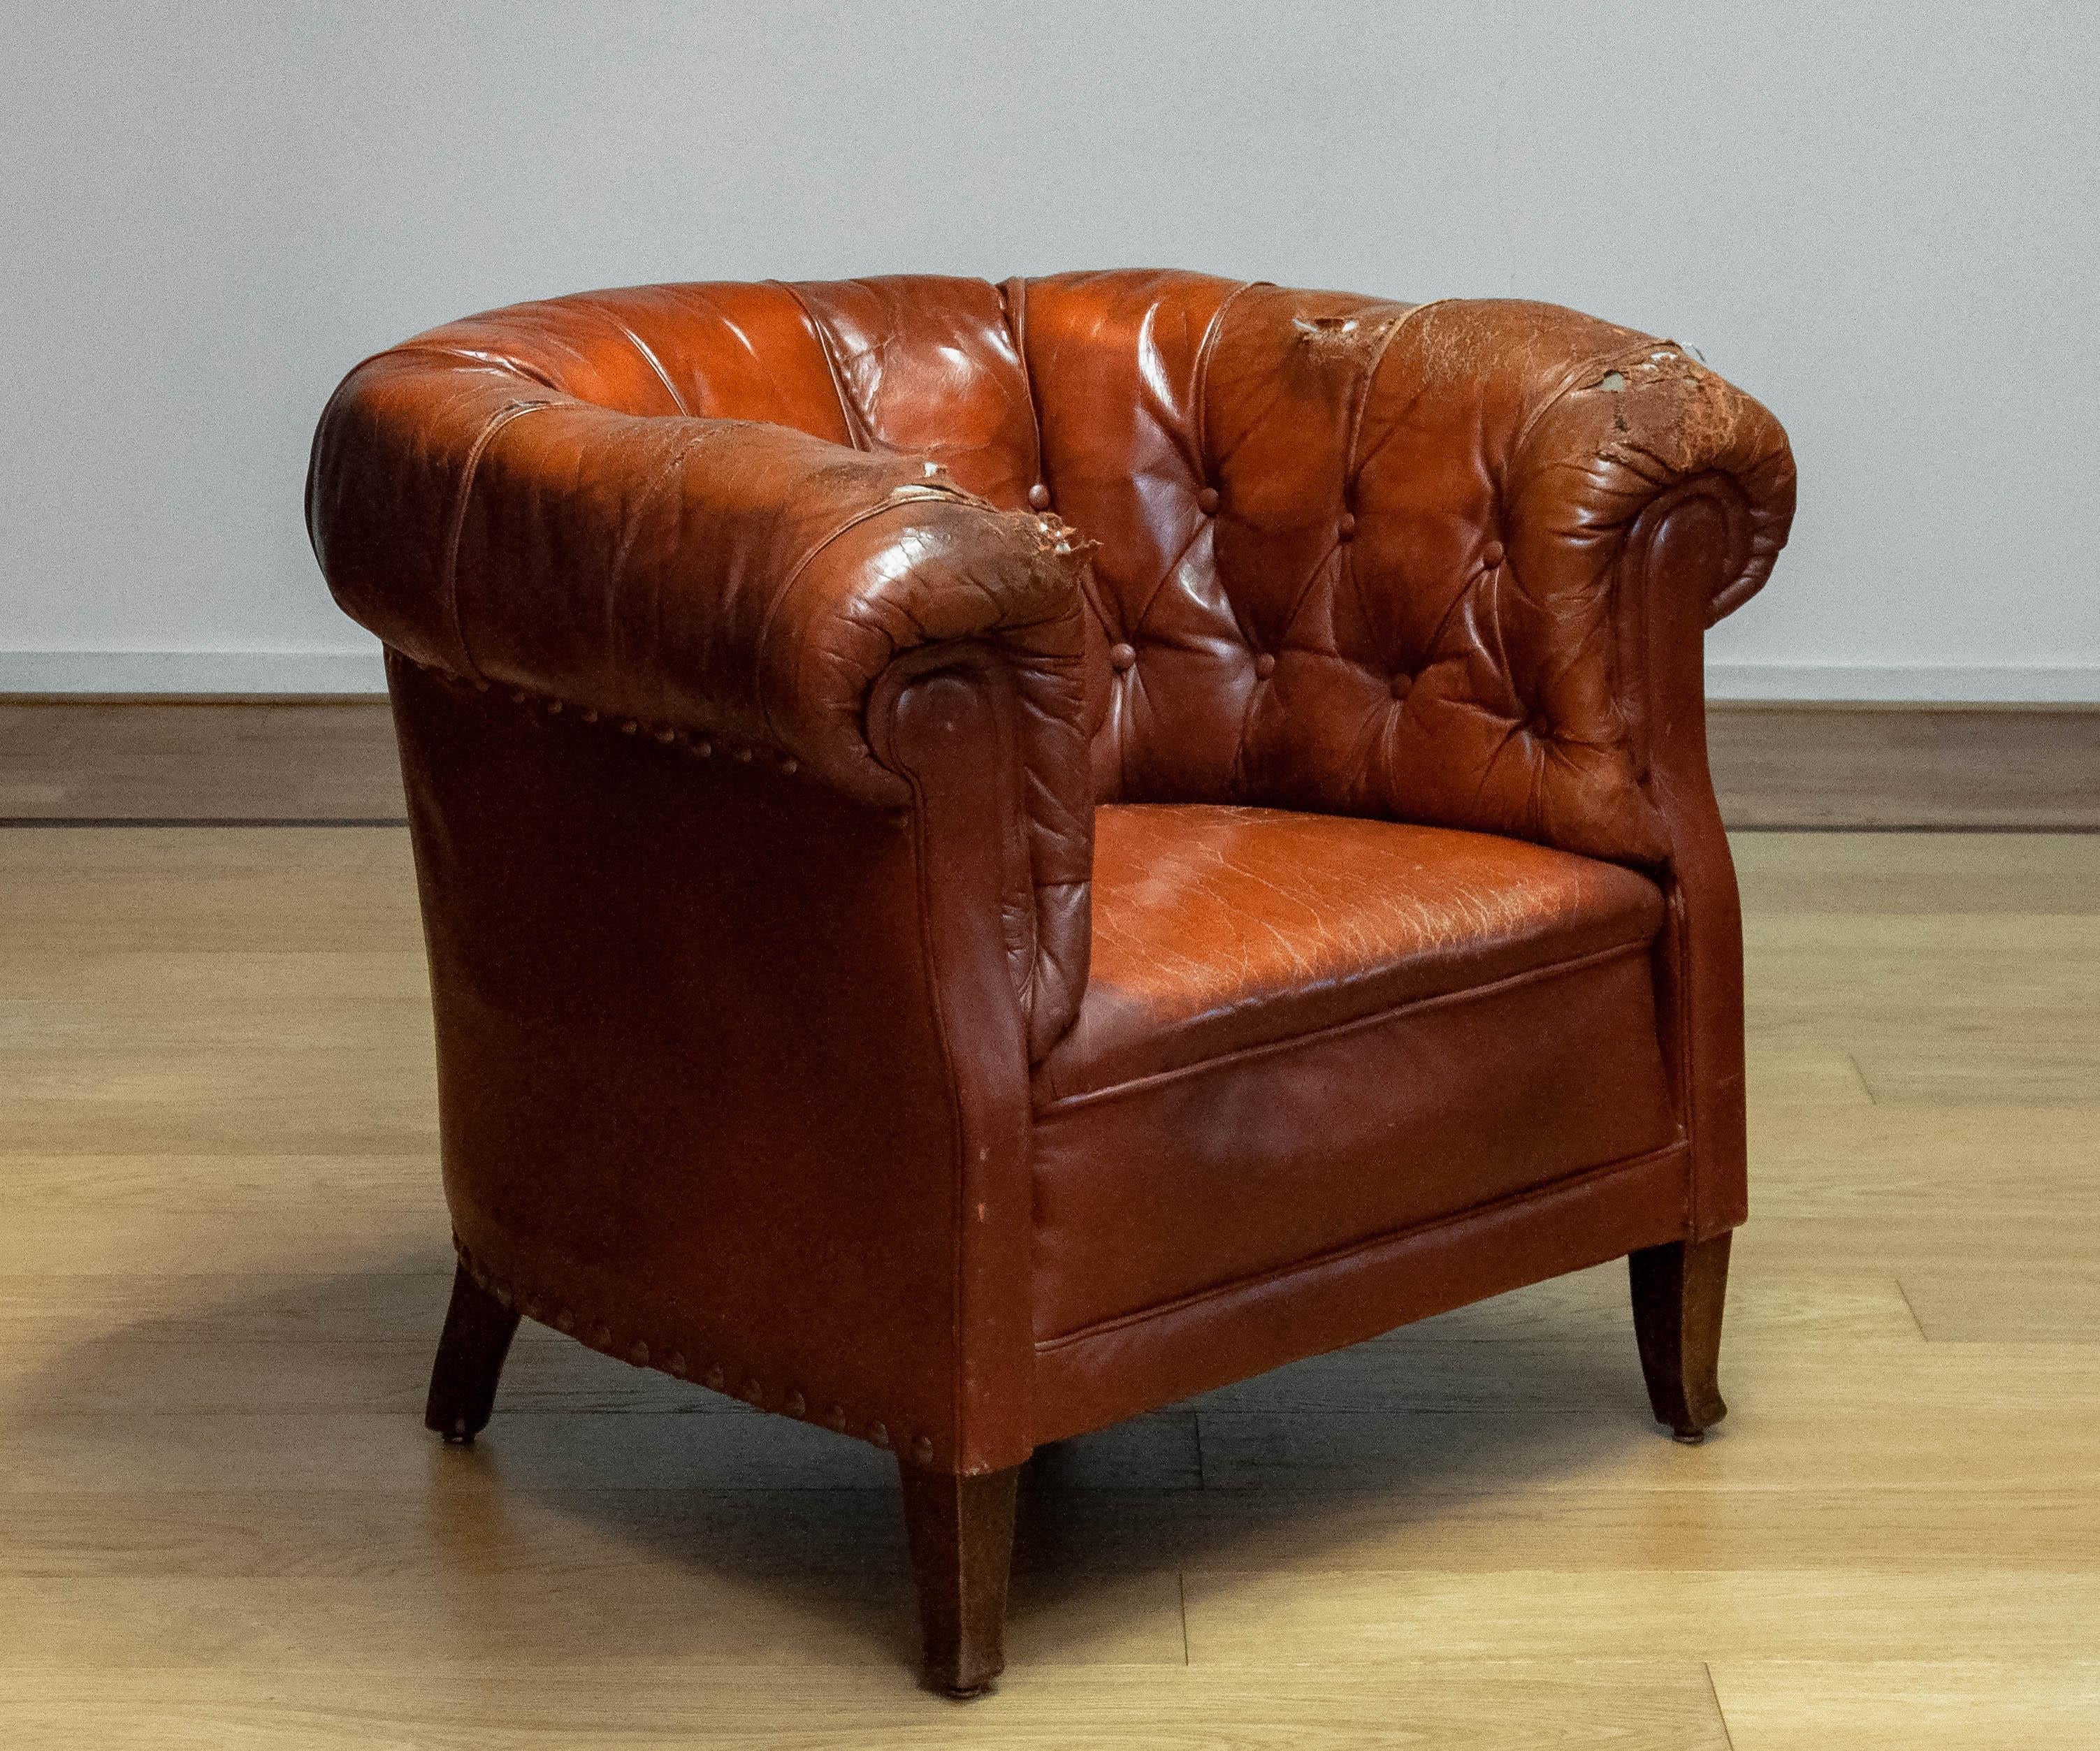 Mid-20th Century 1940s Swedish Tufted Club Chair 'Chesterfield Model' In Tan Brown Worn Leather